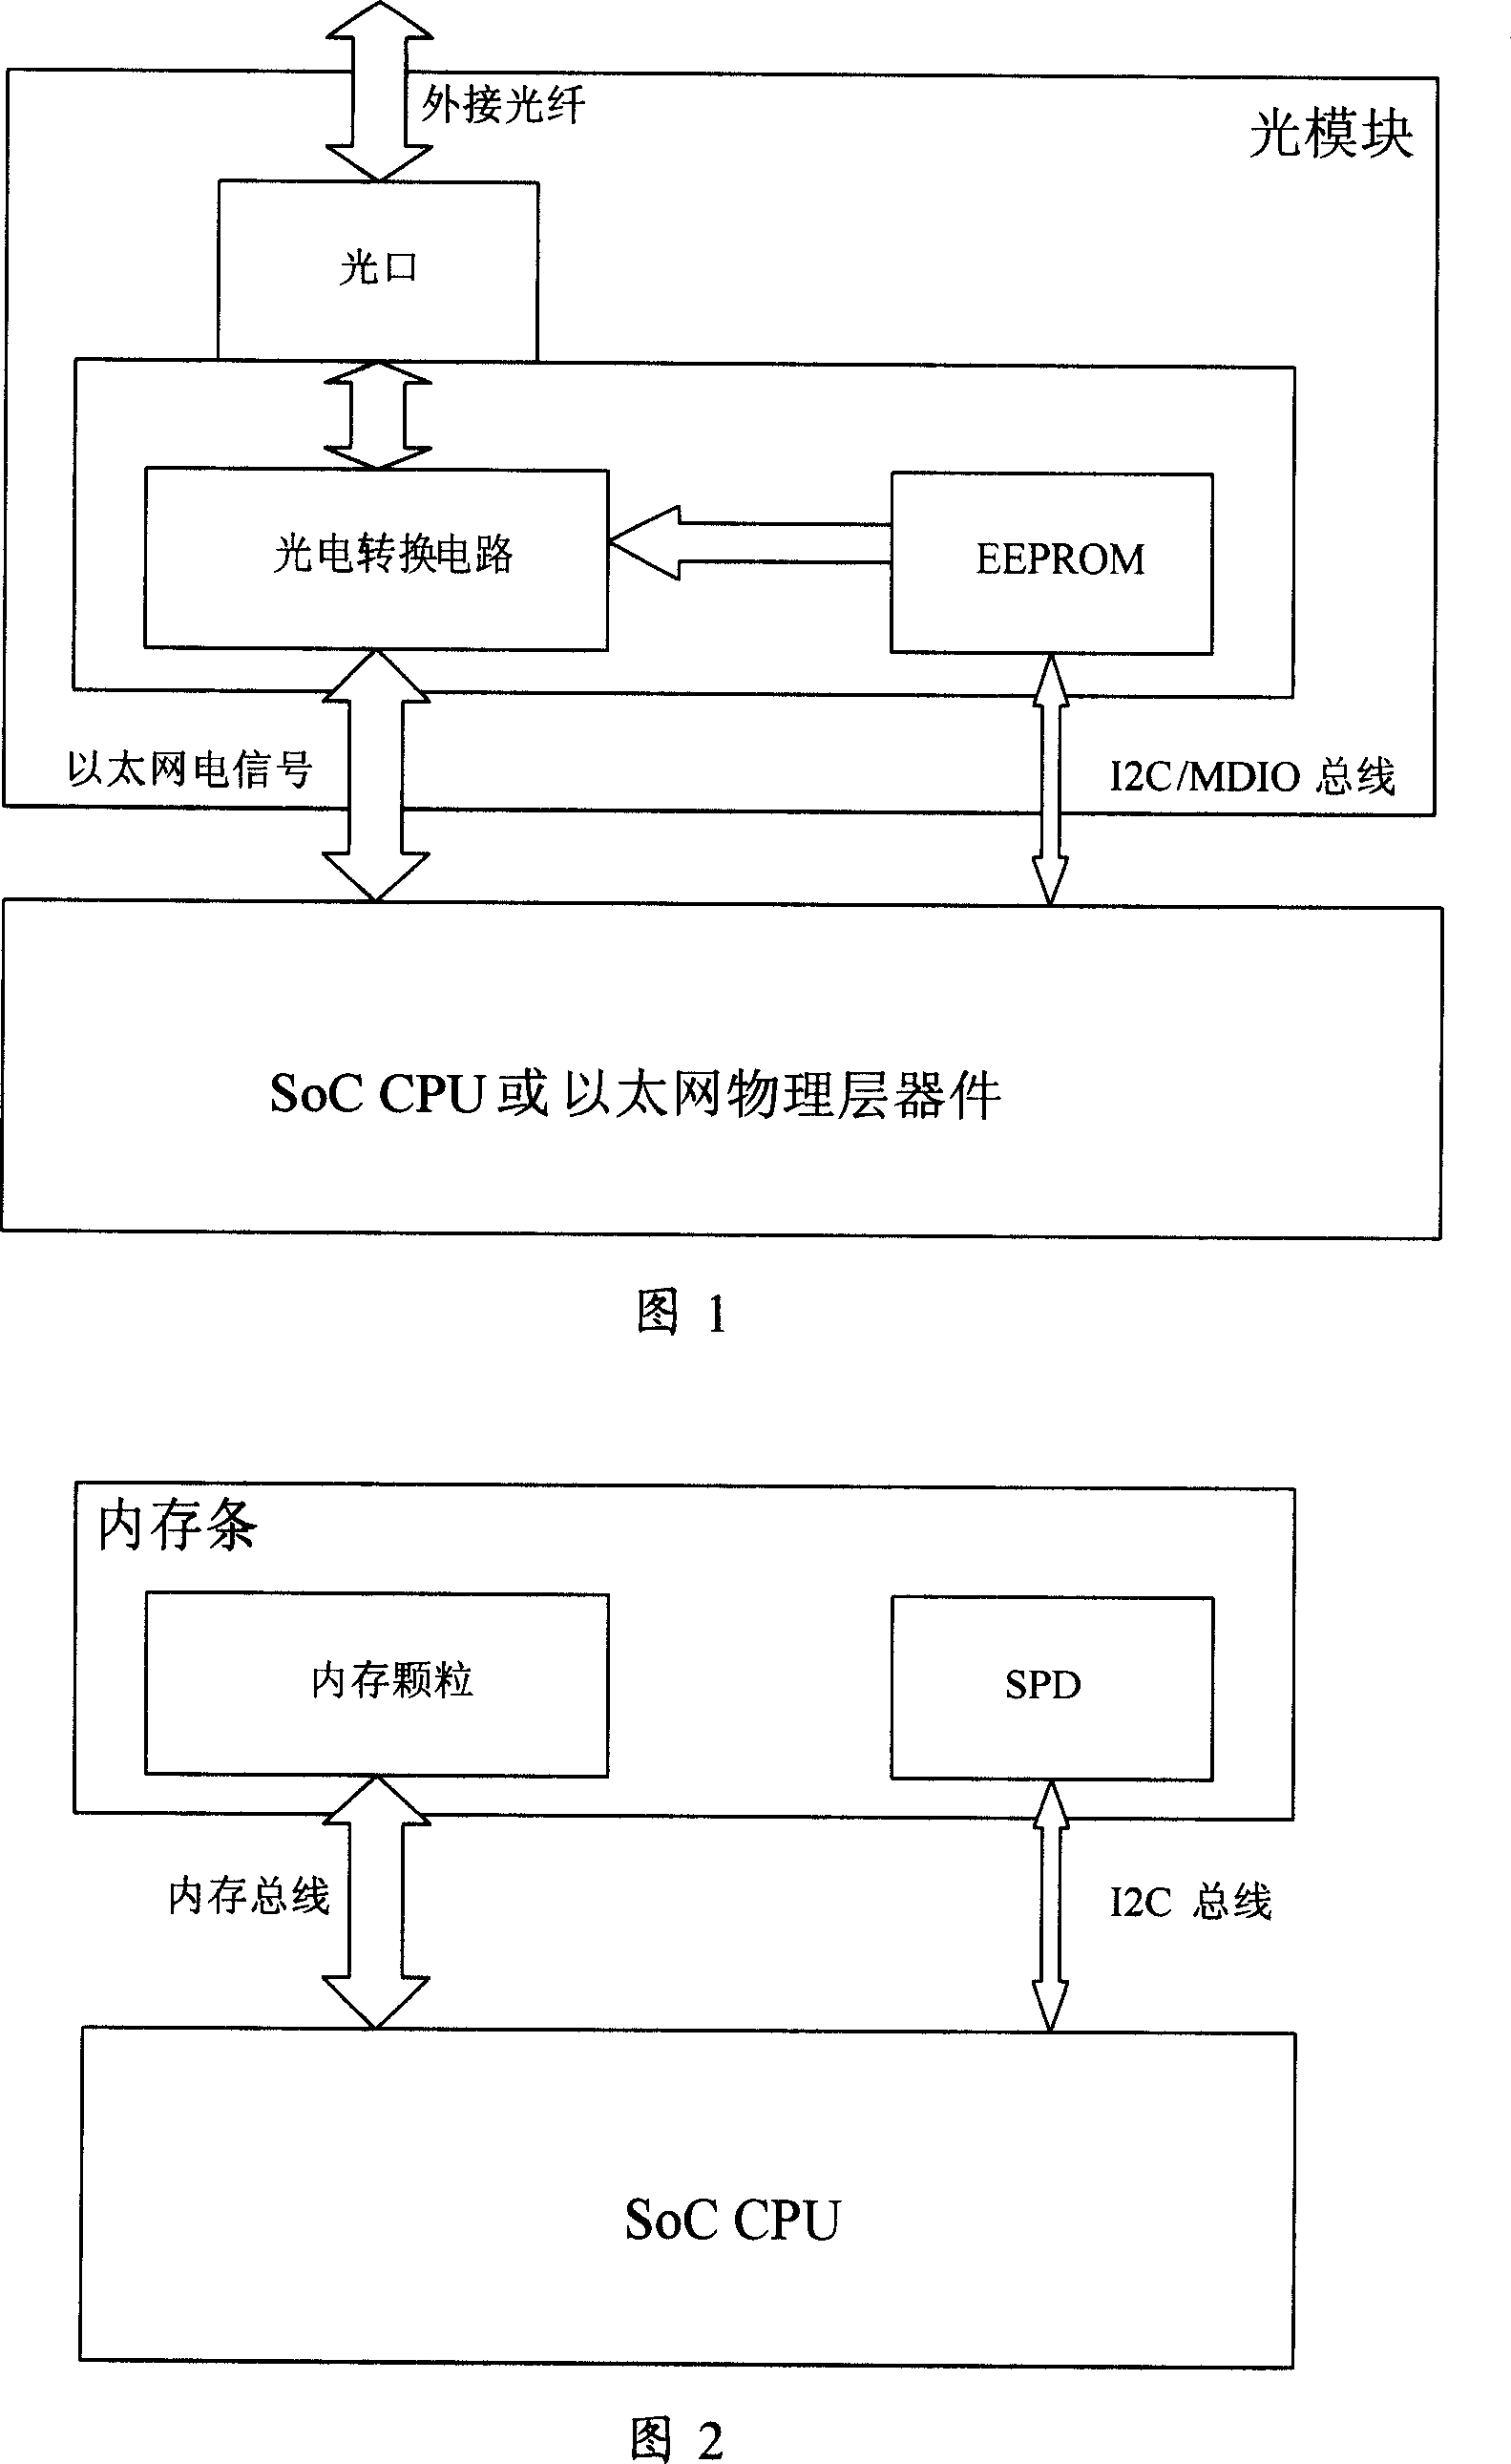 Data storing device in pluggable electronic assembly and system and method for implementing anti-counterfeiting